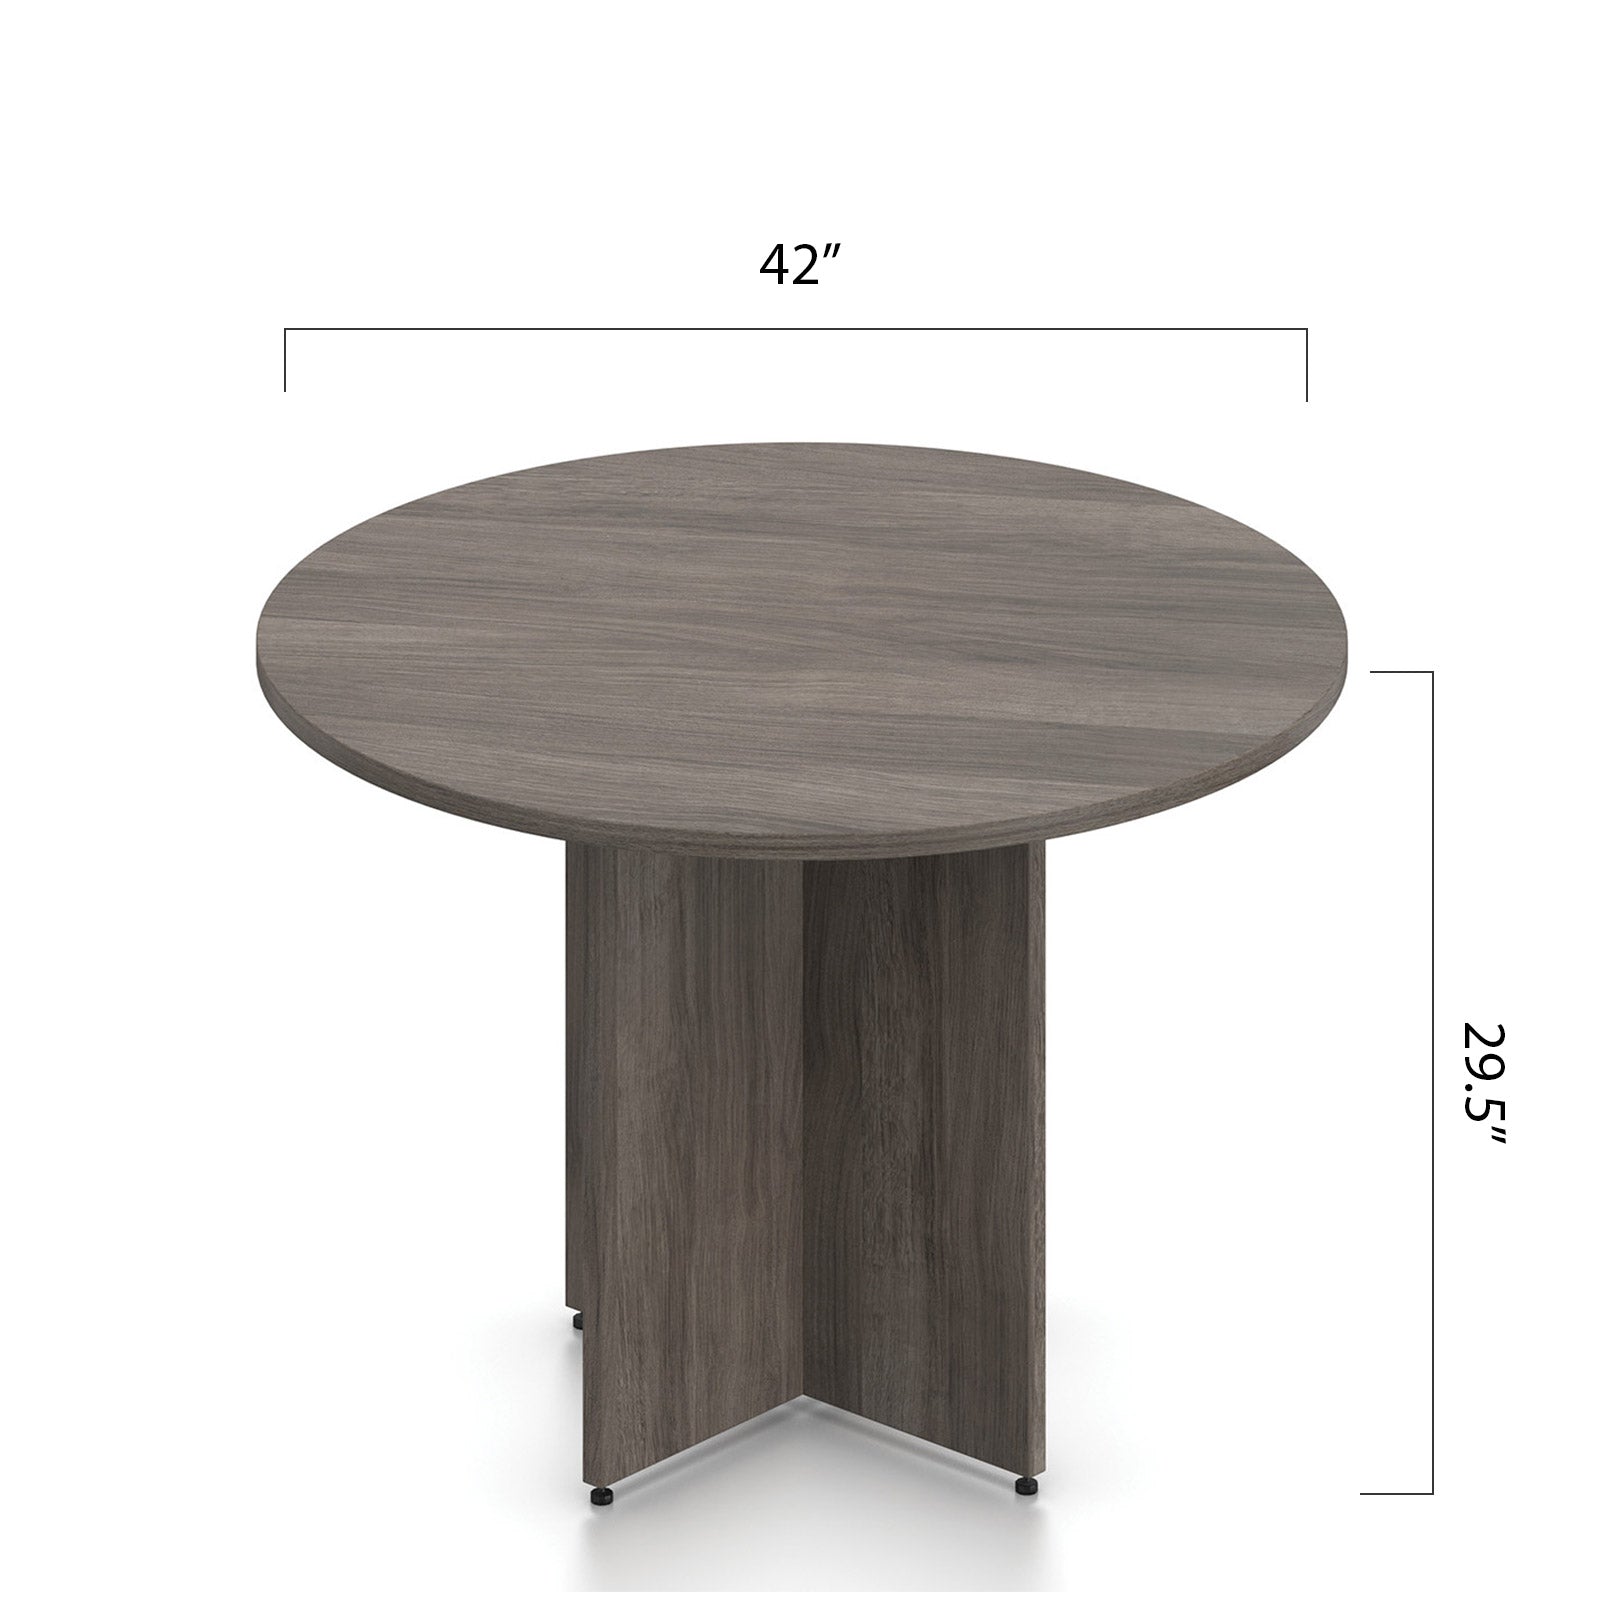 36", 42" Round Table and Chair Set (G11642B)